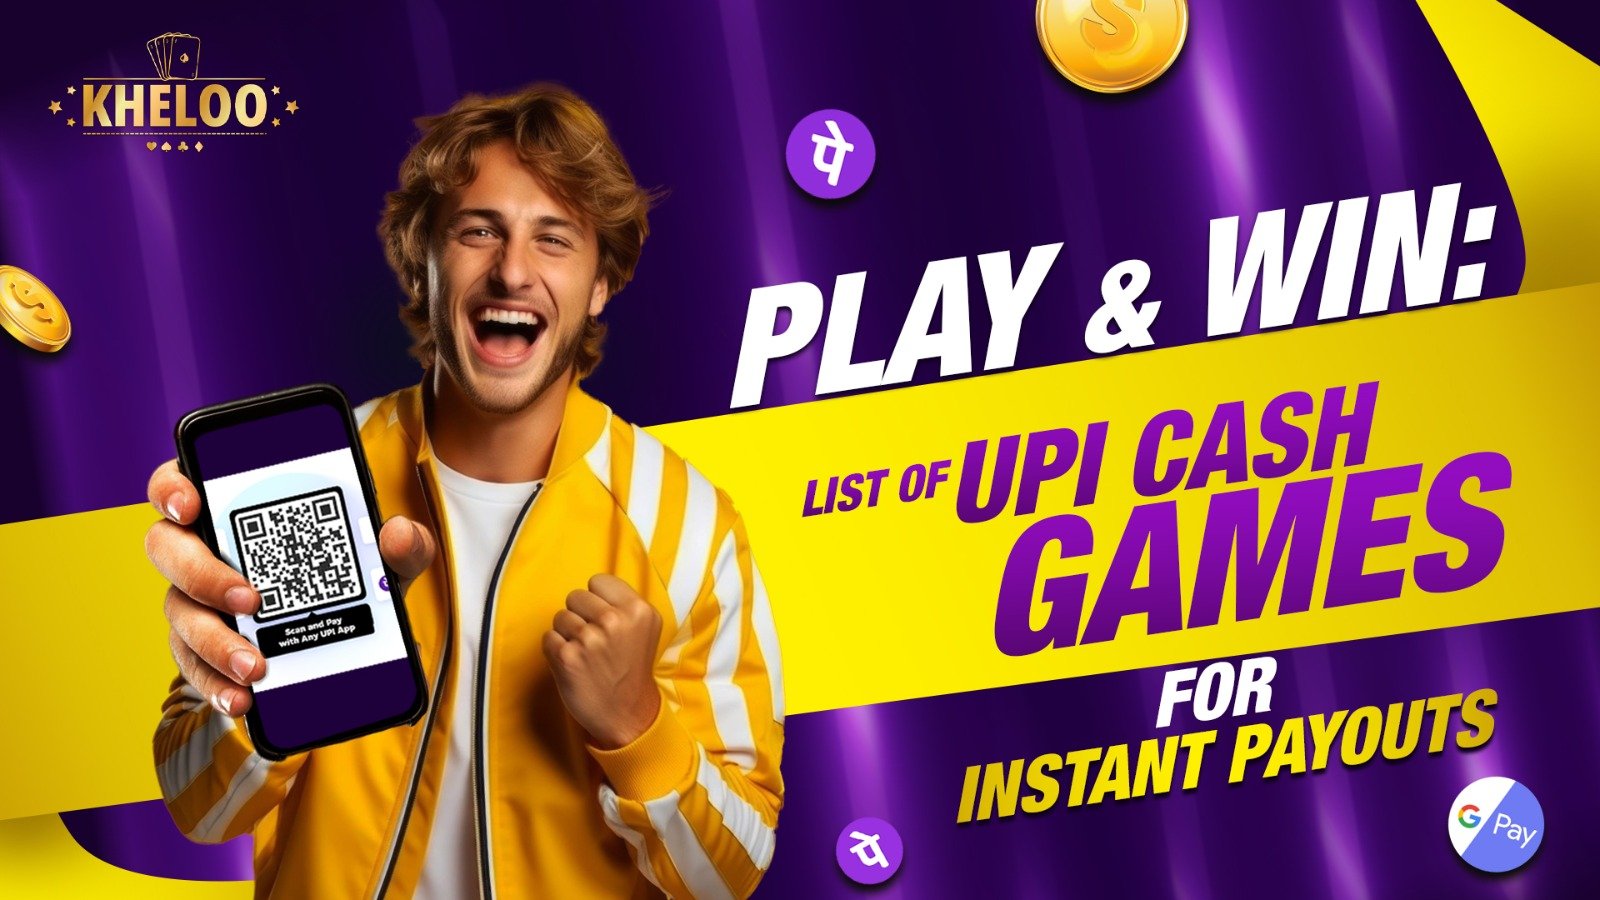 Play and Win: List of UPI Cash Games for Instant Payouts - Kheloo